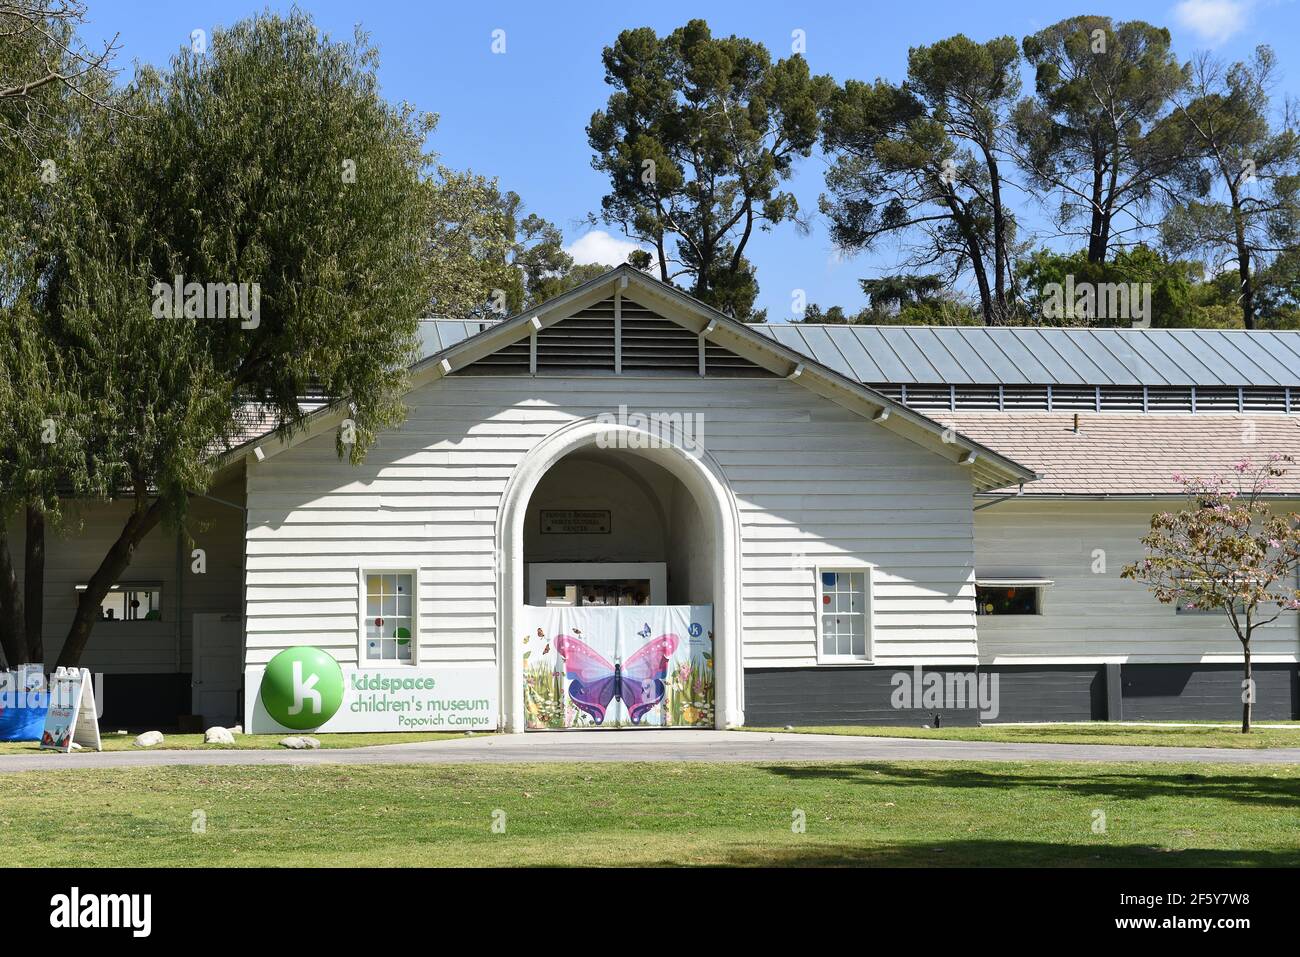 PASADENA, CALIFORNIA - 26 MAR 2021: Kidspace Childrens Museum in Brookside Park, offers more than 40 hands-on experiences for children. Stock Photo